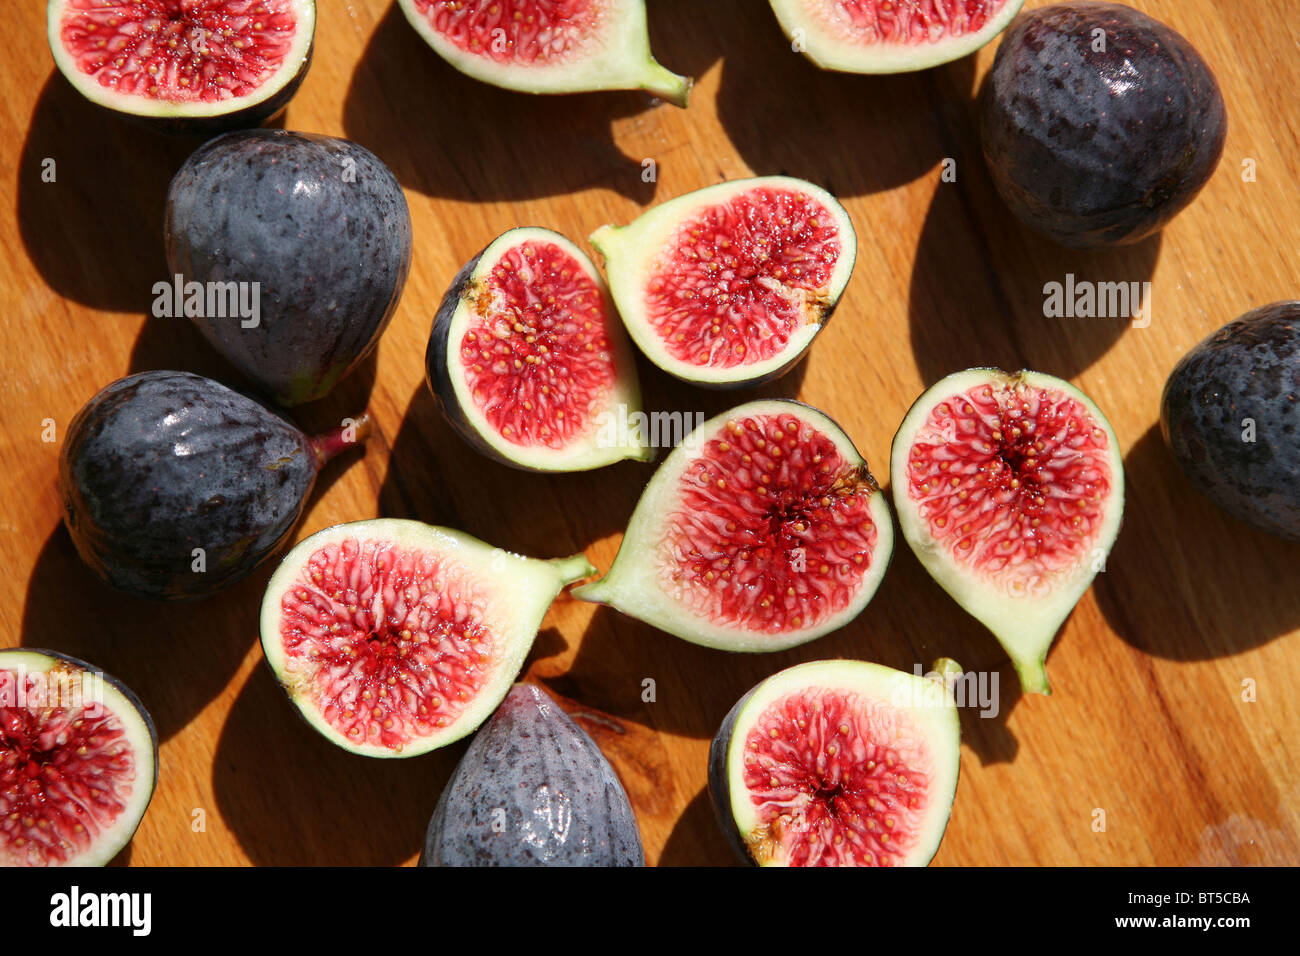 (Ficus carica) Halved and whole fresh figs on a wooden chopping board, outside, close up. Stock Photo